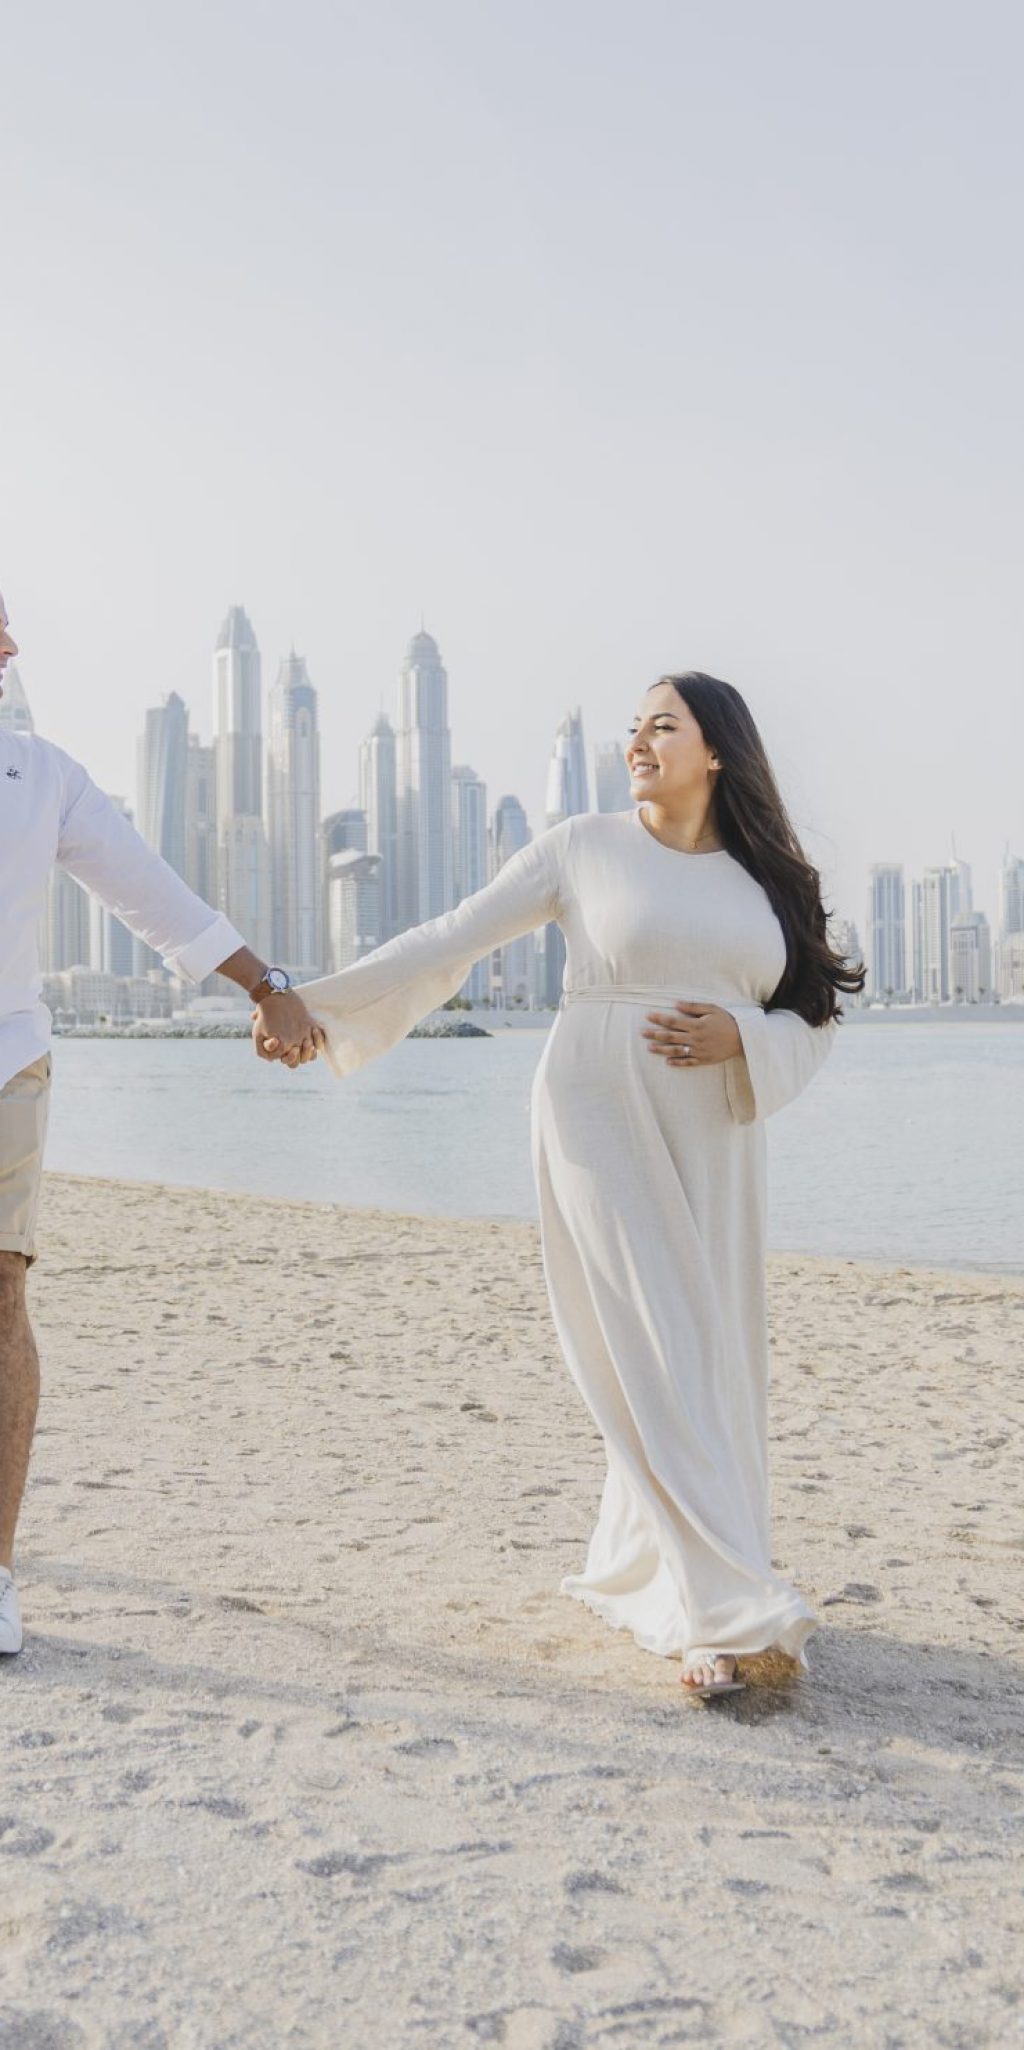 Maternity Photoshoot in dubai - Happiness is relishing these preggy days.